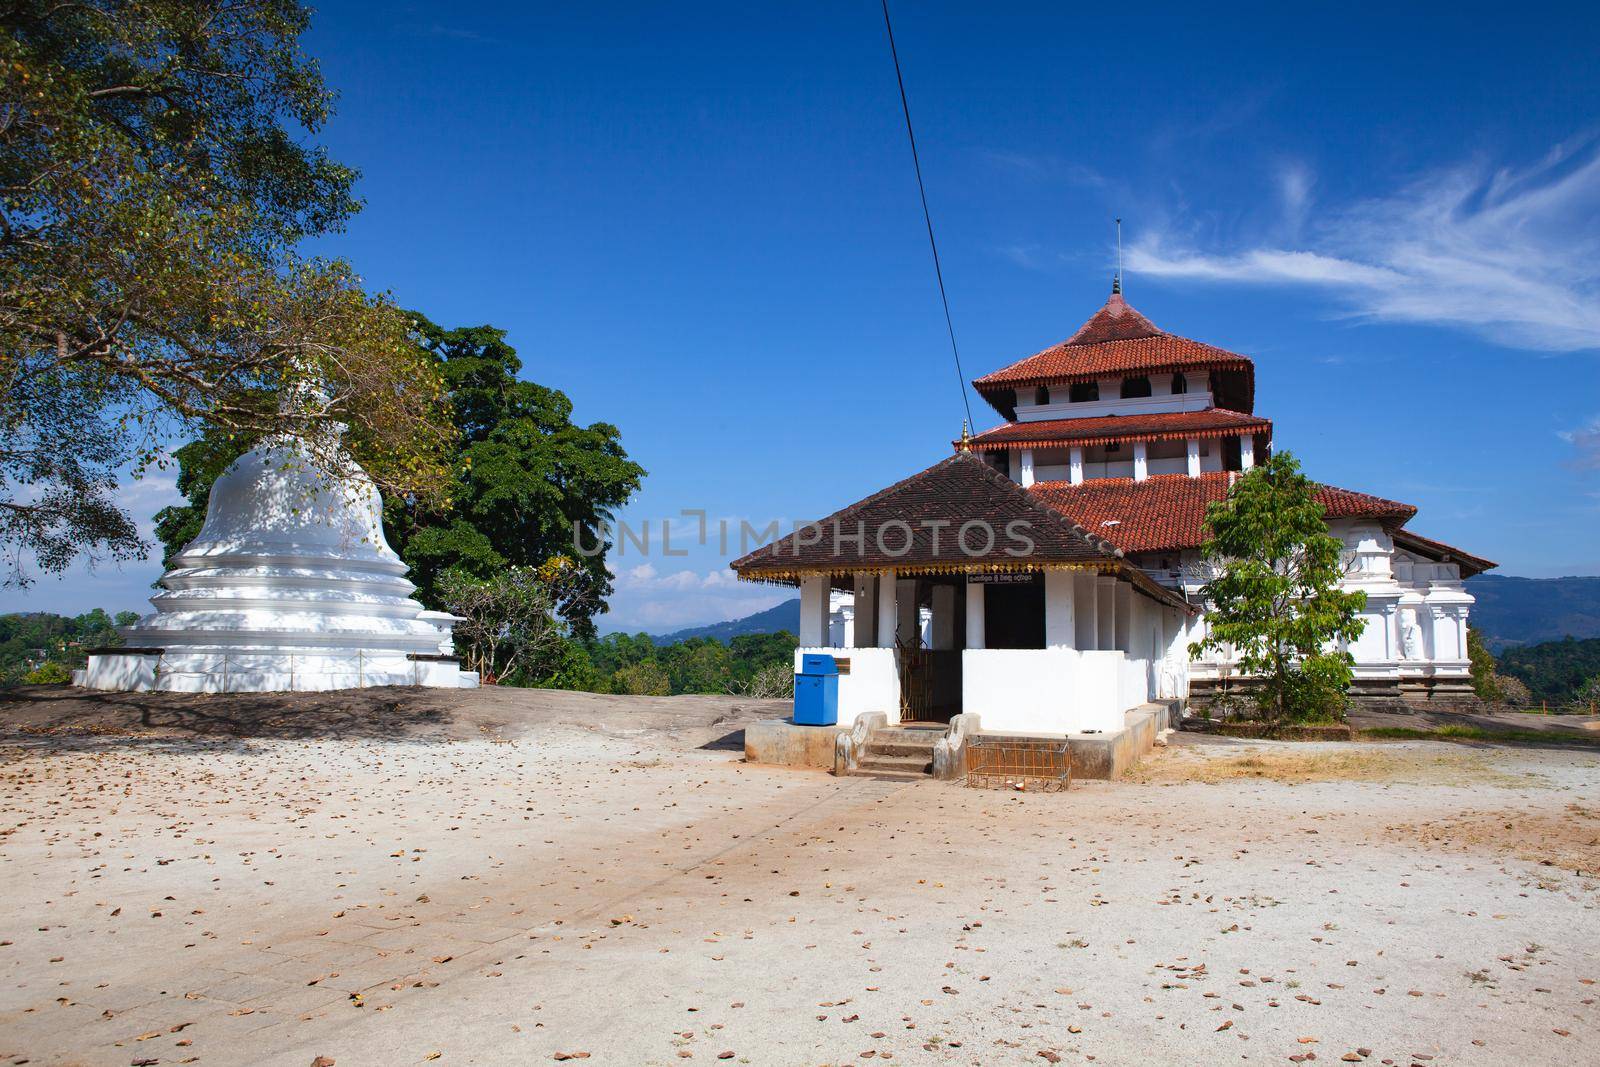 Lankatilaka is Buddhist temple of the 14th century in the Hiyarapitiya village, from the Udu Nuwara area of Kandy district in Sri Lanka. This historical temple was built by the Gampola king